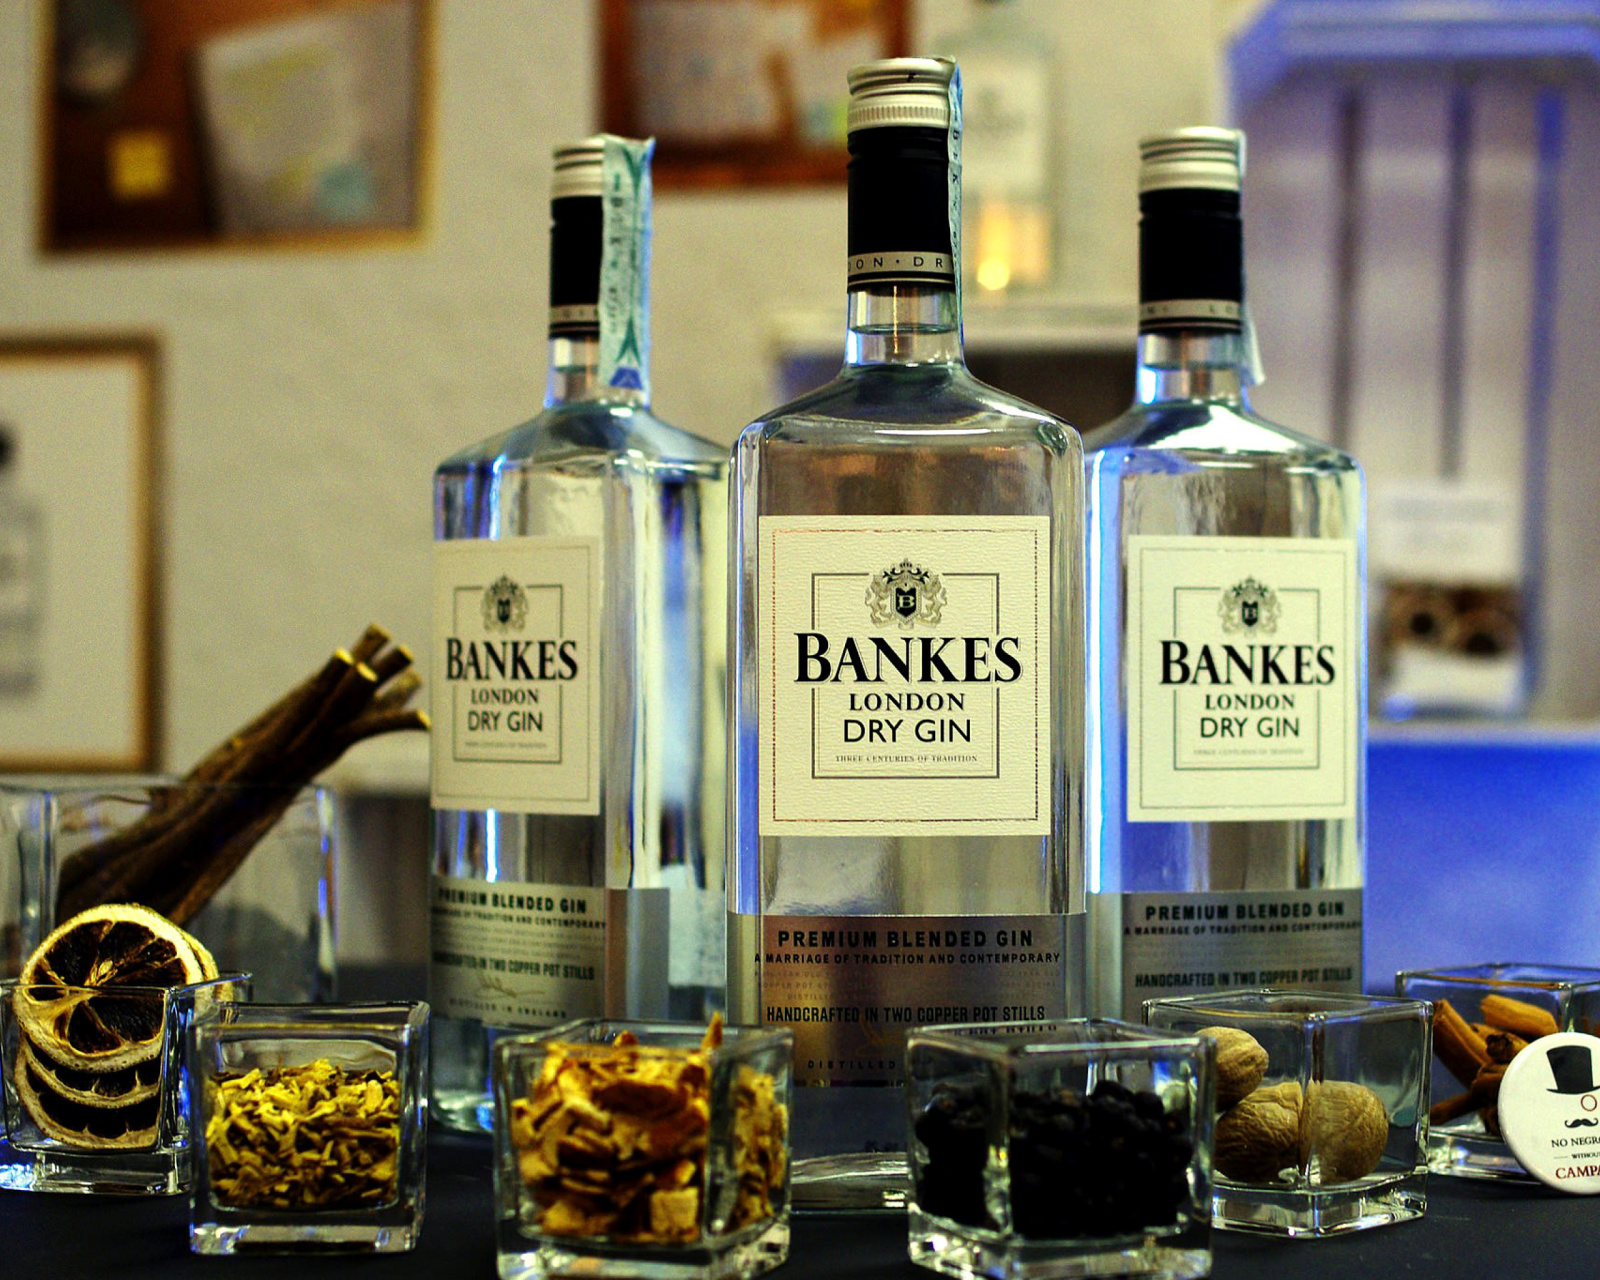 Dry Gin Bankers wallpaper 1600x1280